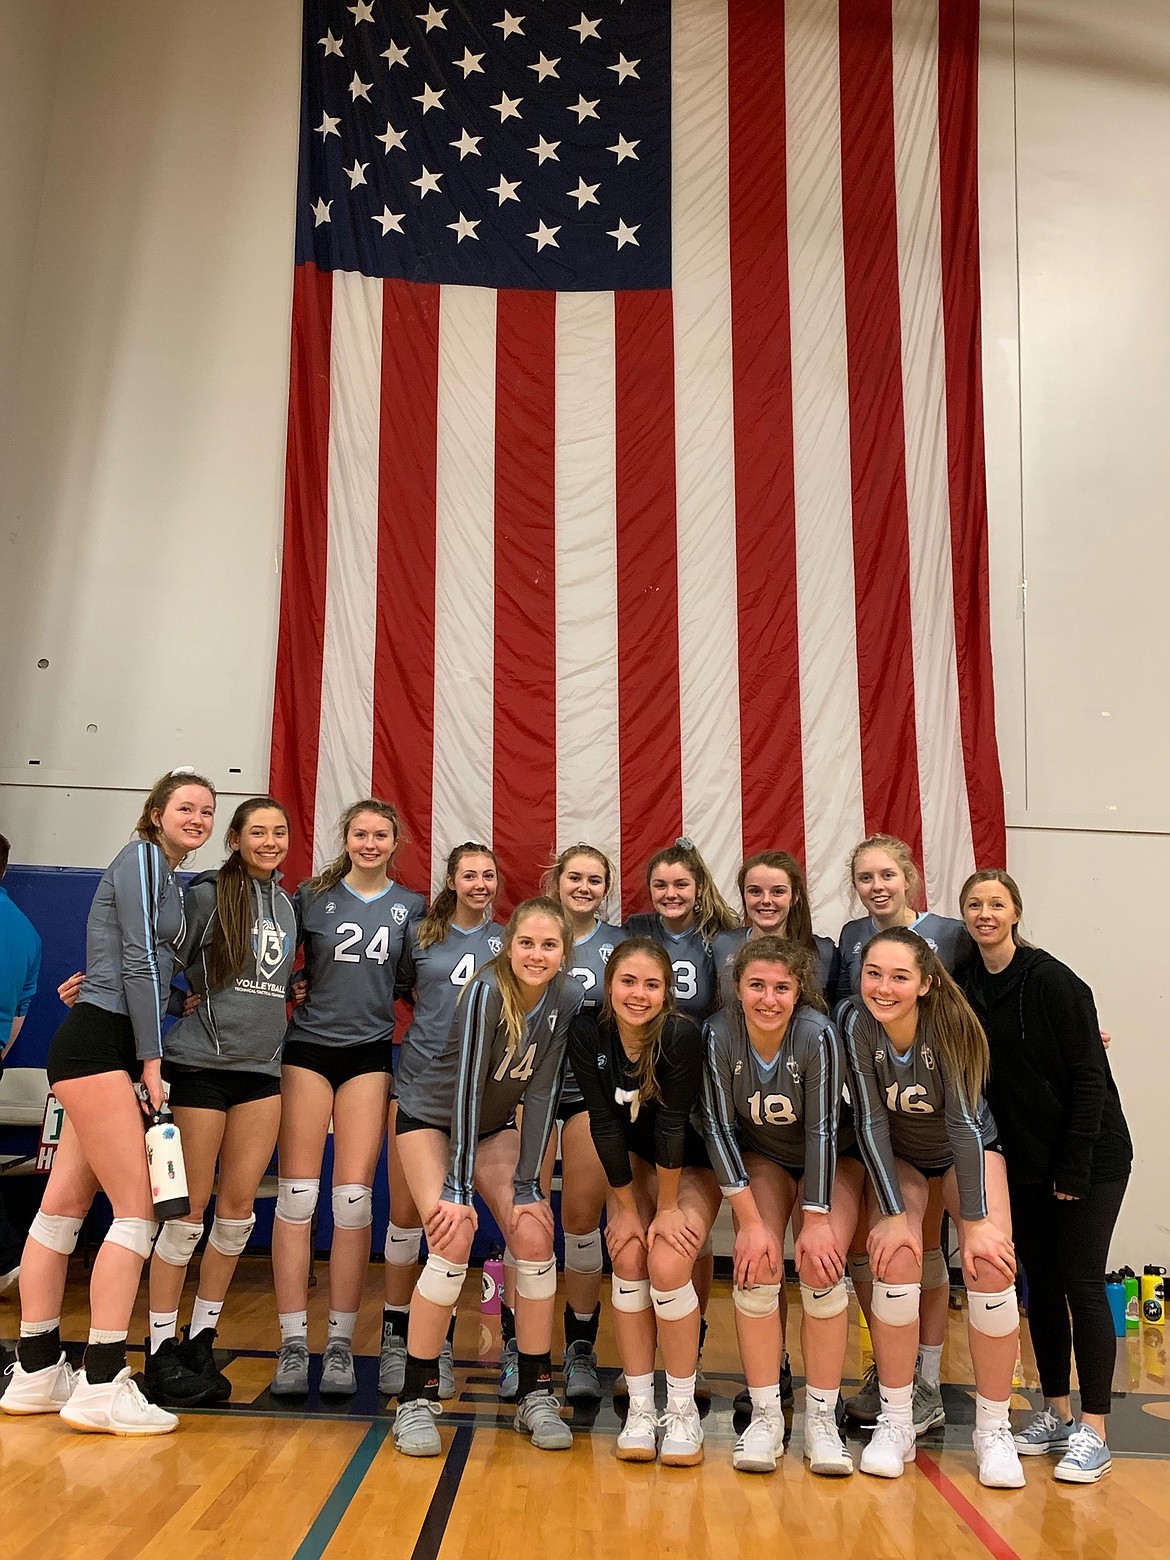 Courtesy photo
The T3 Smack U16 volleyball team solidified their placement for ERVA Power League at the HUB Sports Center in Liberty Lake on Sunday. In the front row from left are Paige Drechsel, Maggie Bloom,  Sarah Wilkey and Hannah Rowan; and back row from left, Angela Goggin, Sophia TurningRobe, Brenna Hawkins, Mia Roberson, Courtney Garwood, Lauryn Fuller, Jaya Miller, Kiki Cates and coach Robin Reese.